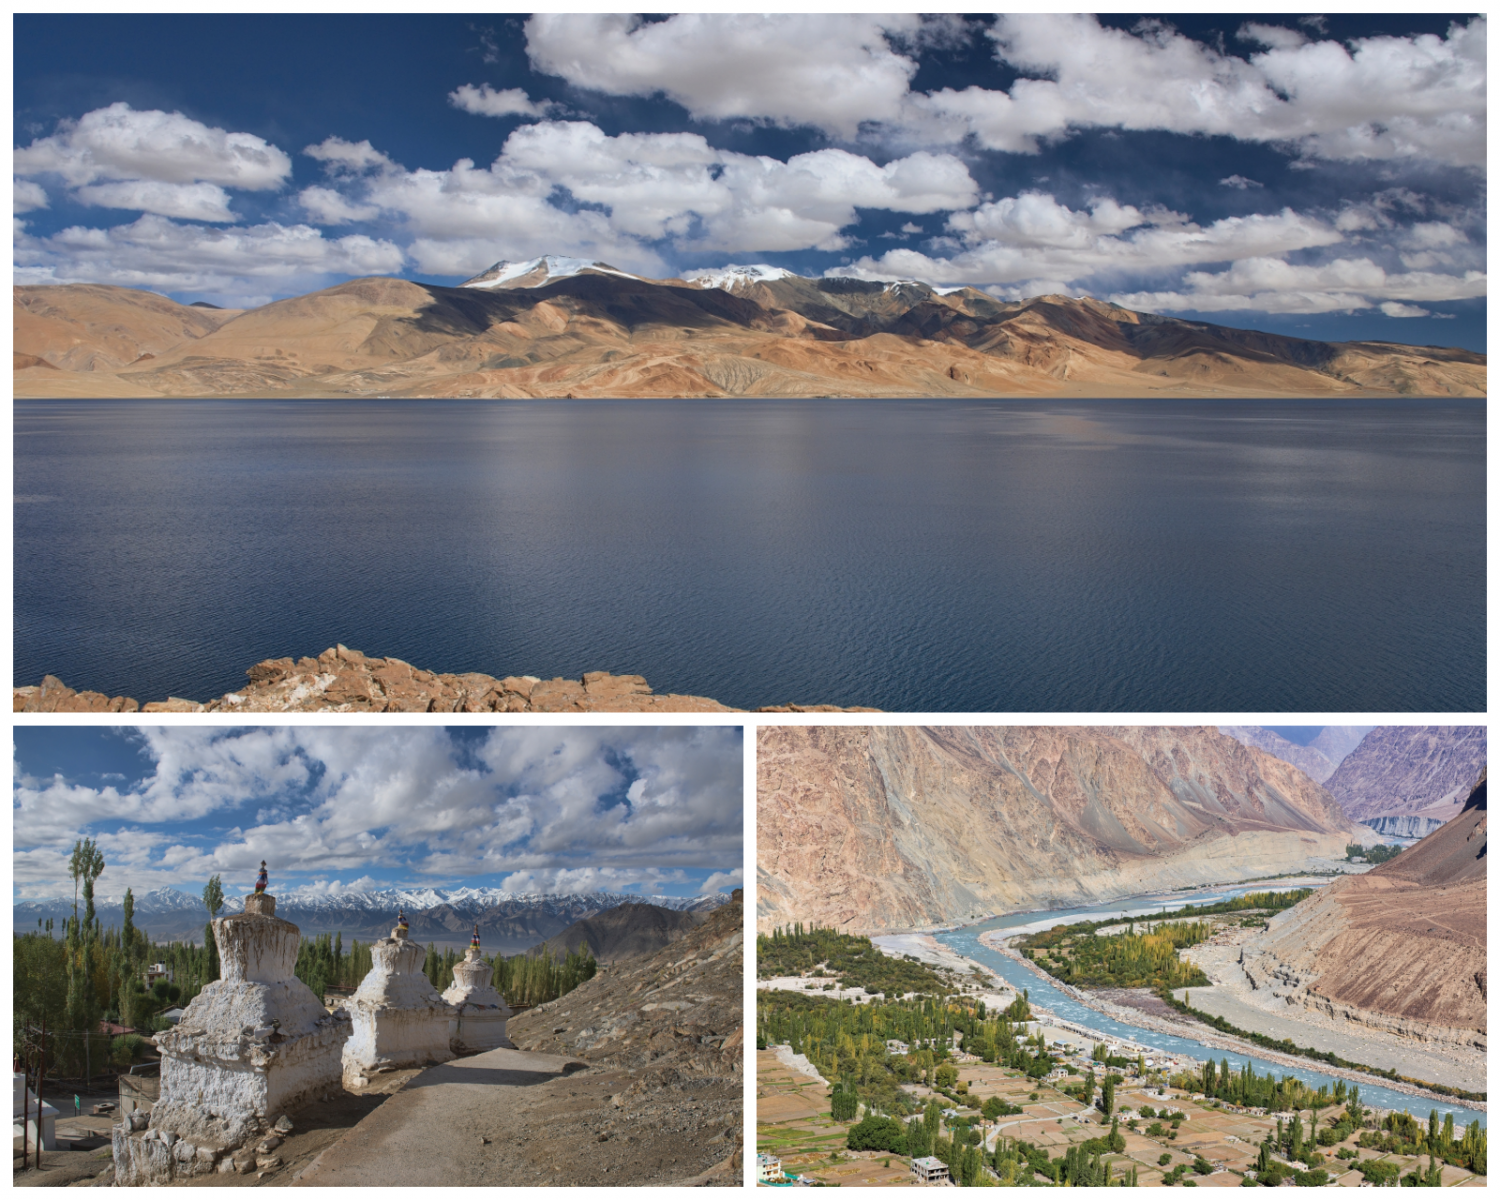 THE HIMALAYAS Cut off by snow for over half the year, Ladakh is one of the world's most stunning physical wonders